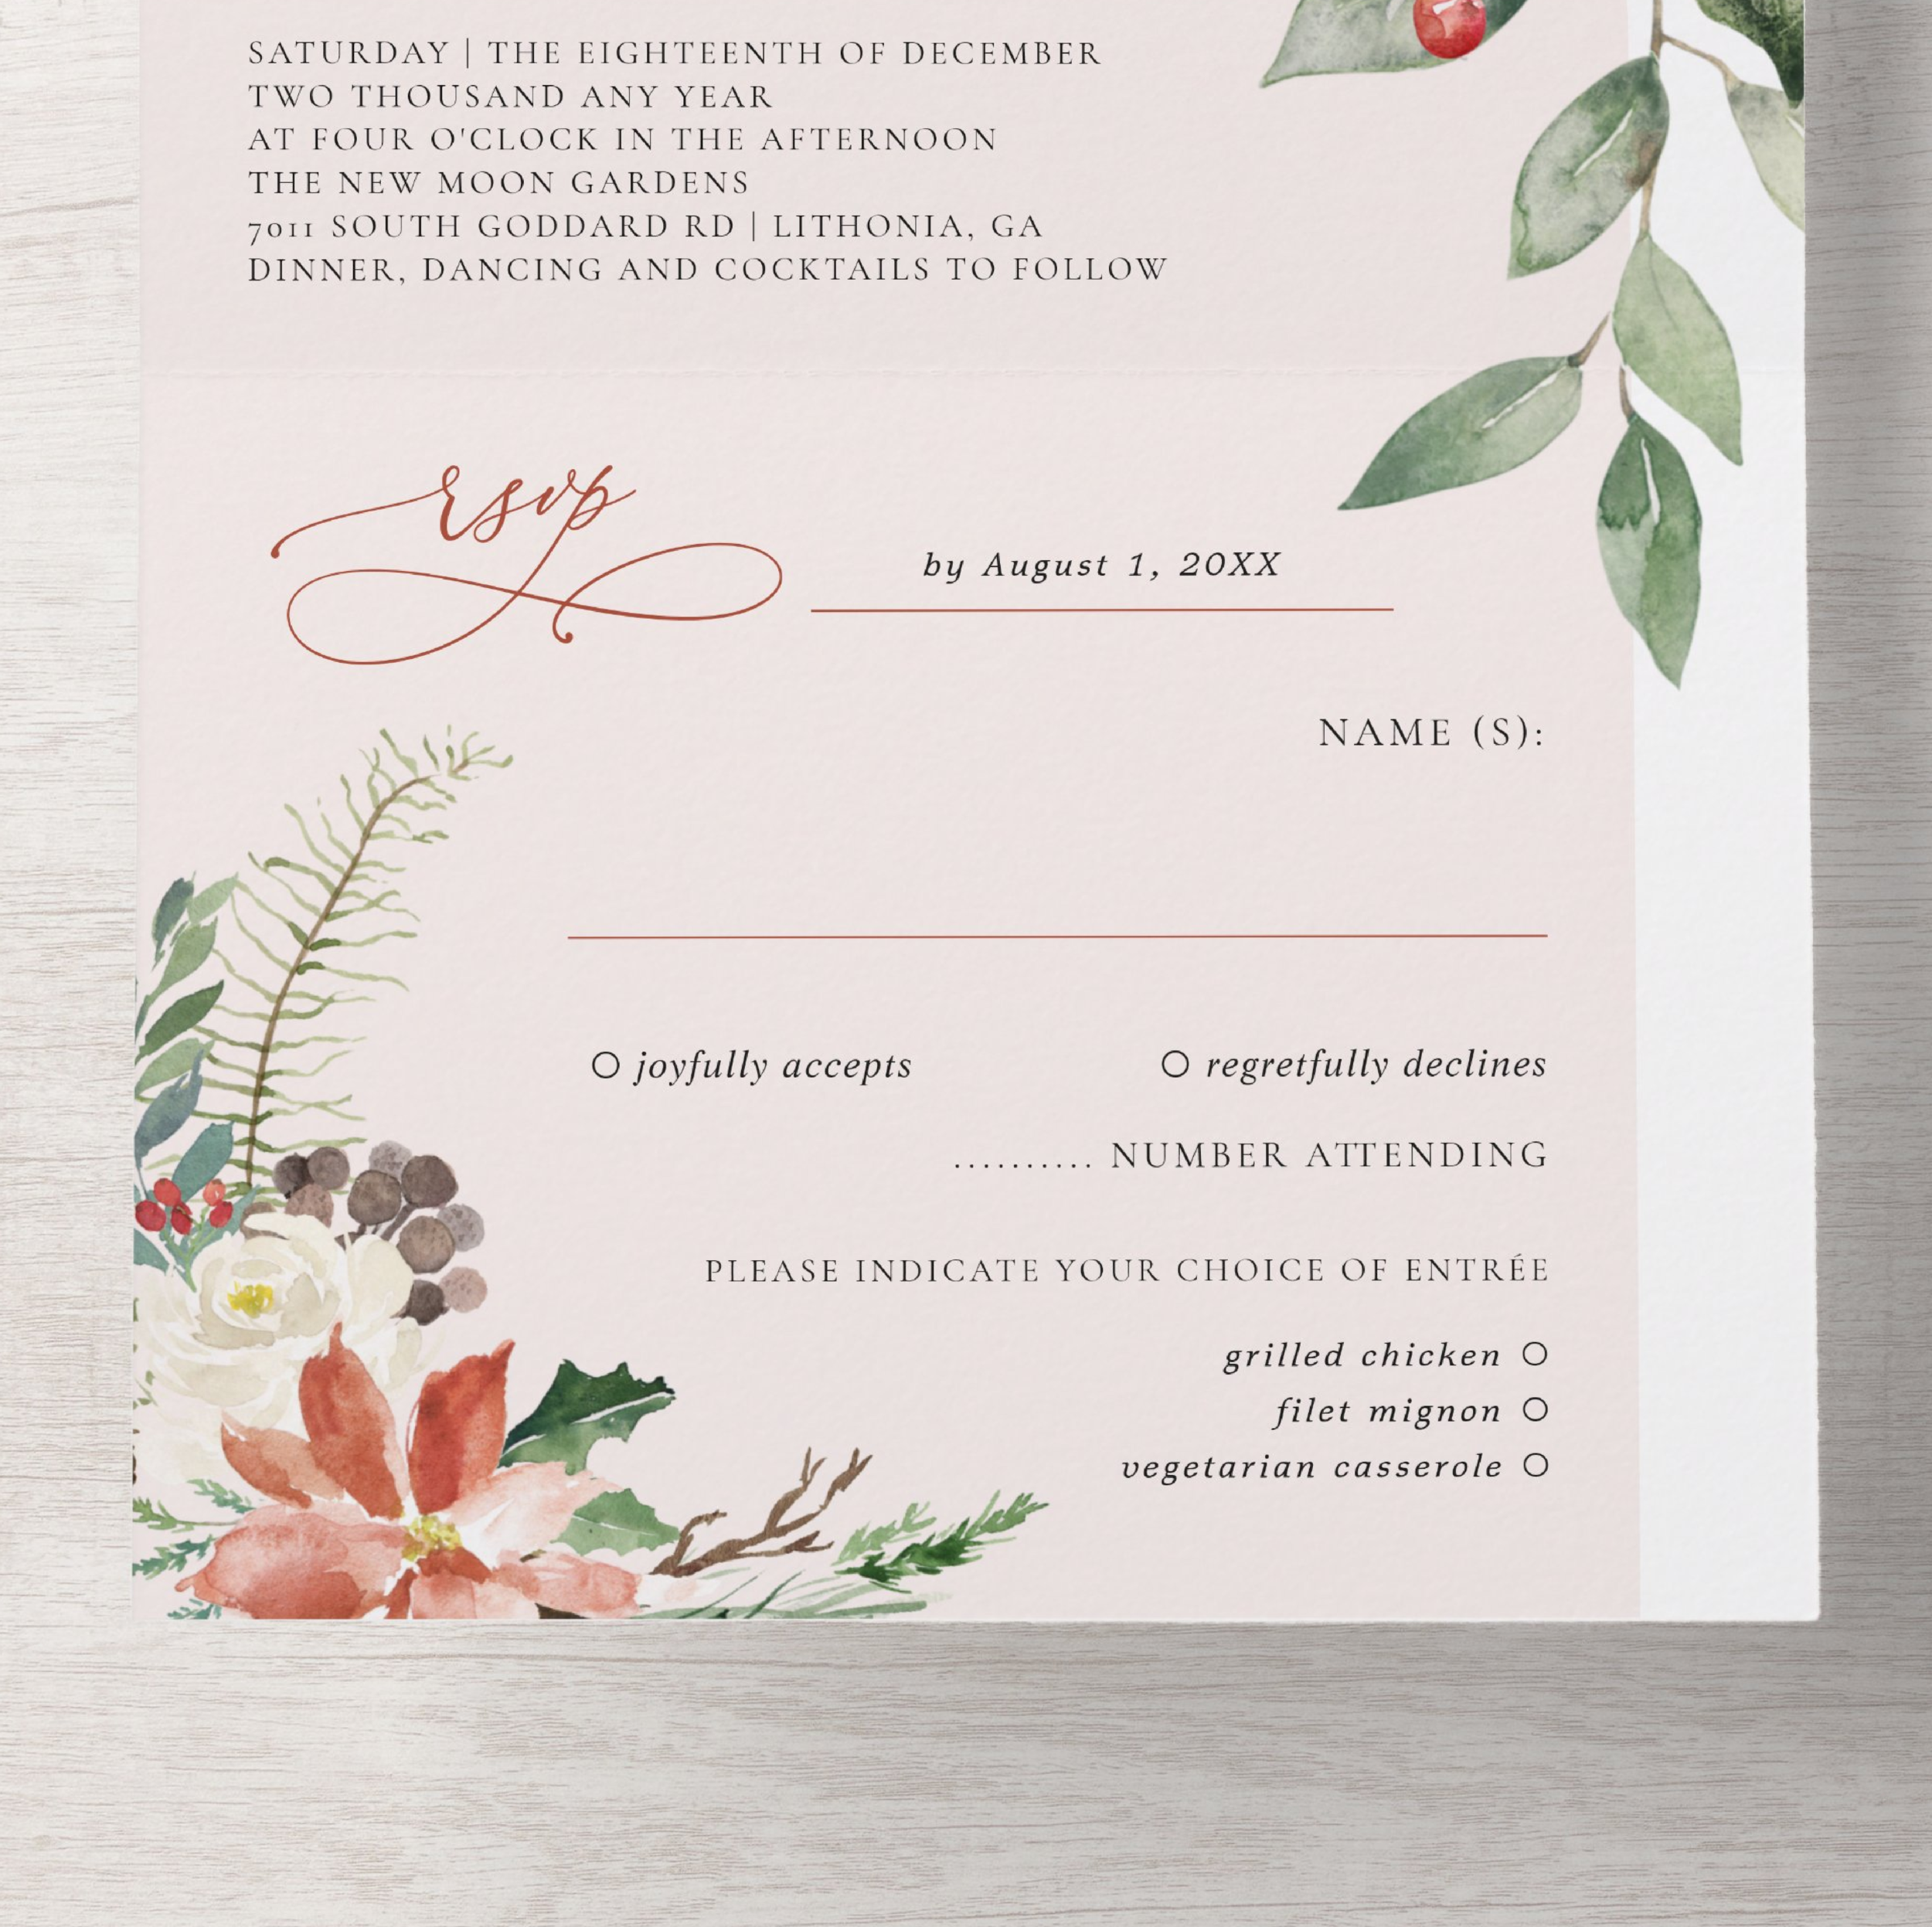 tis_the_season_christmas_wedding_floral_all_in_one_invitation-r3c447a070010465aa1bcc4a7fe497d9b_uog0w_1024.png